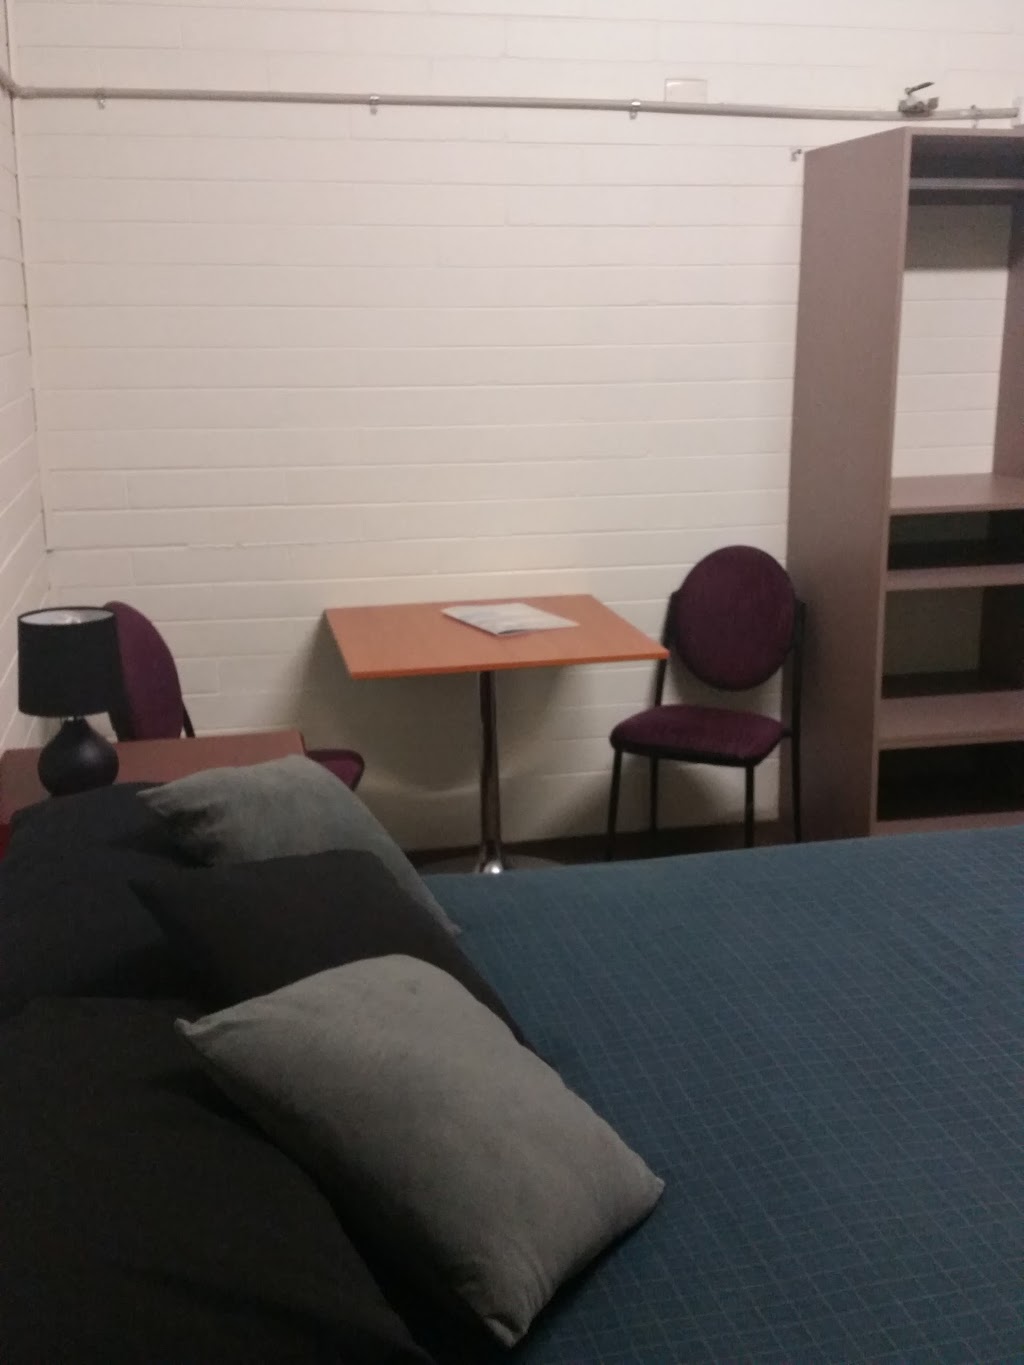 Curtin Budget Motel | lodging | Cotter Rd, Curtin ACT 2605, Australia | 0434036606 OR +61 434 036 606